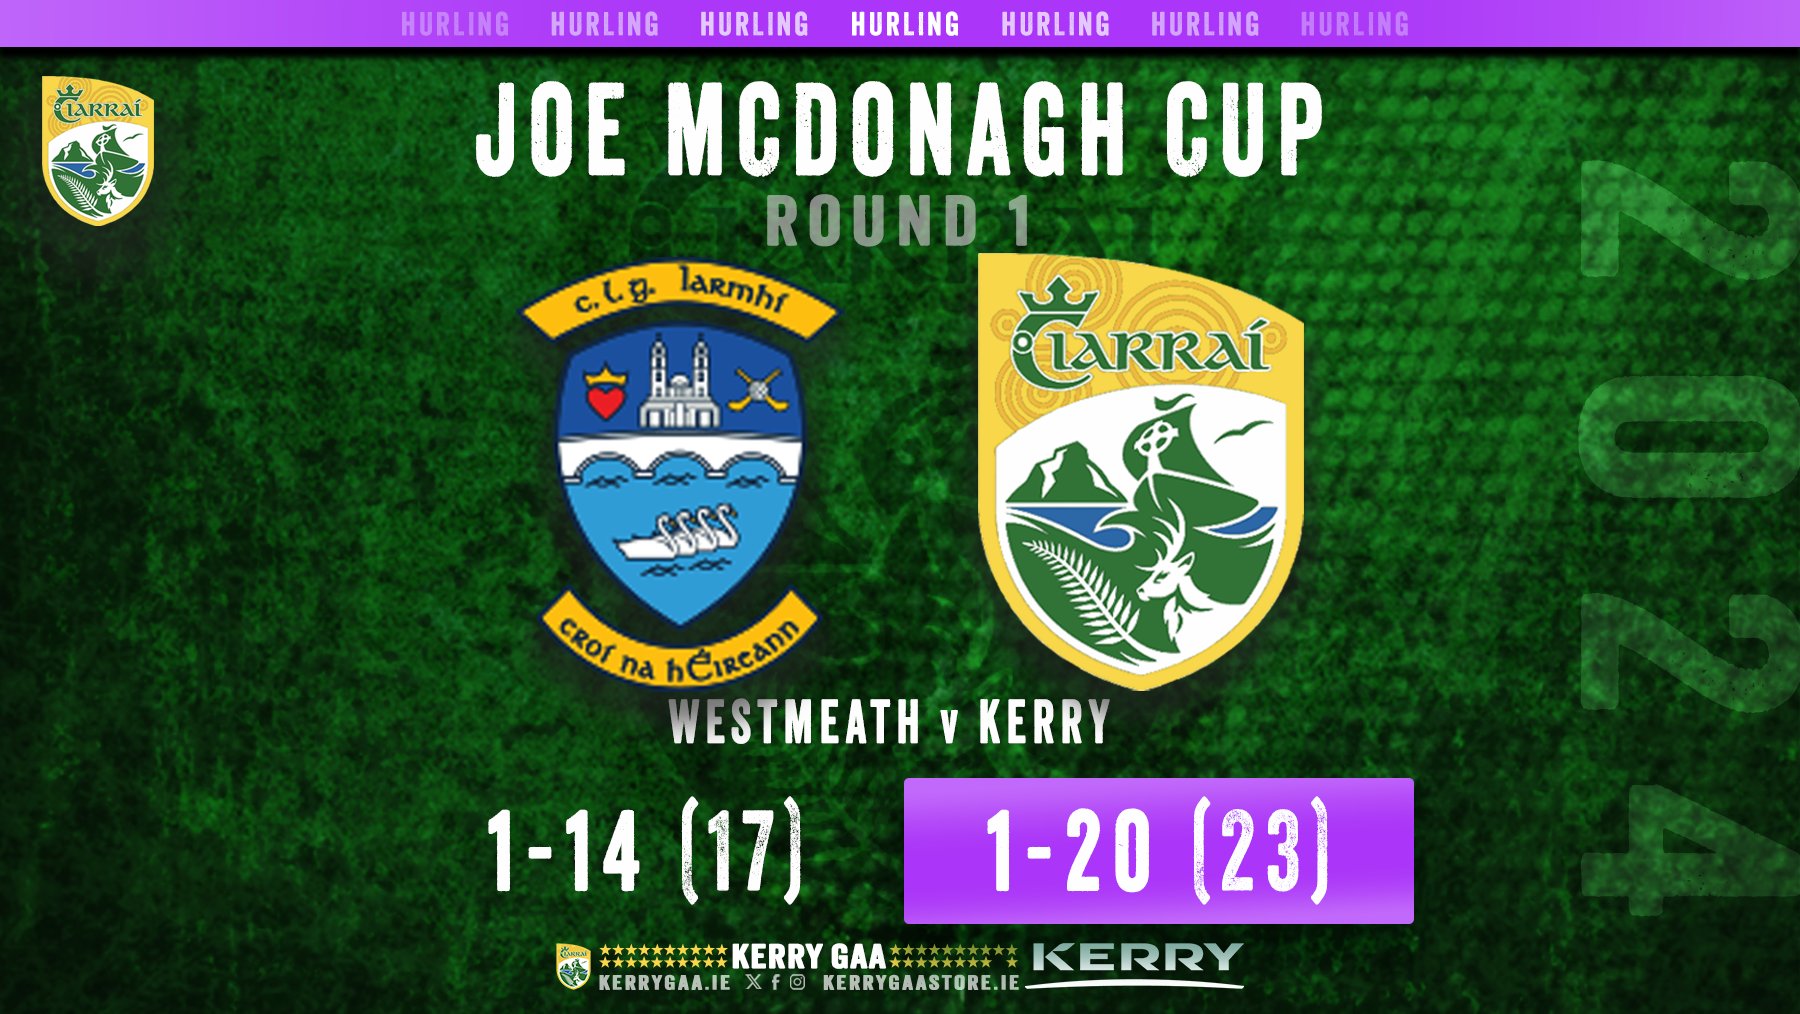 Opening Round win for the Kingdom against Westmeath in Joe McDonagh Cup